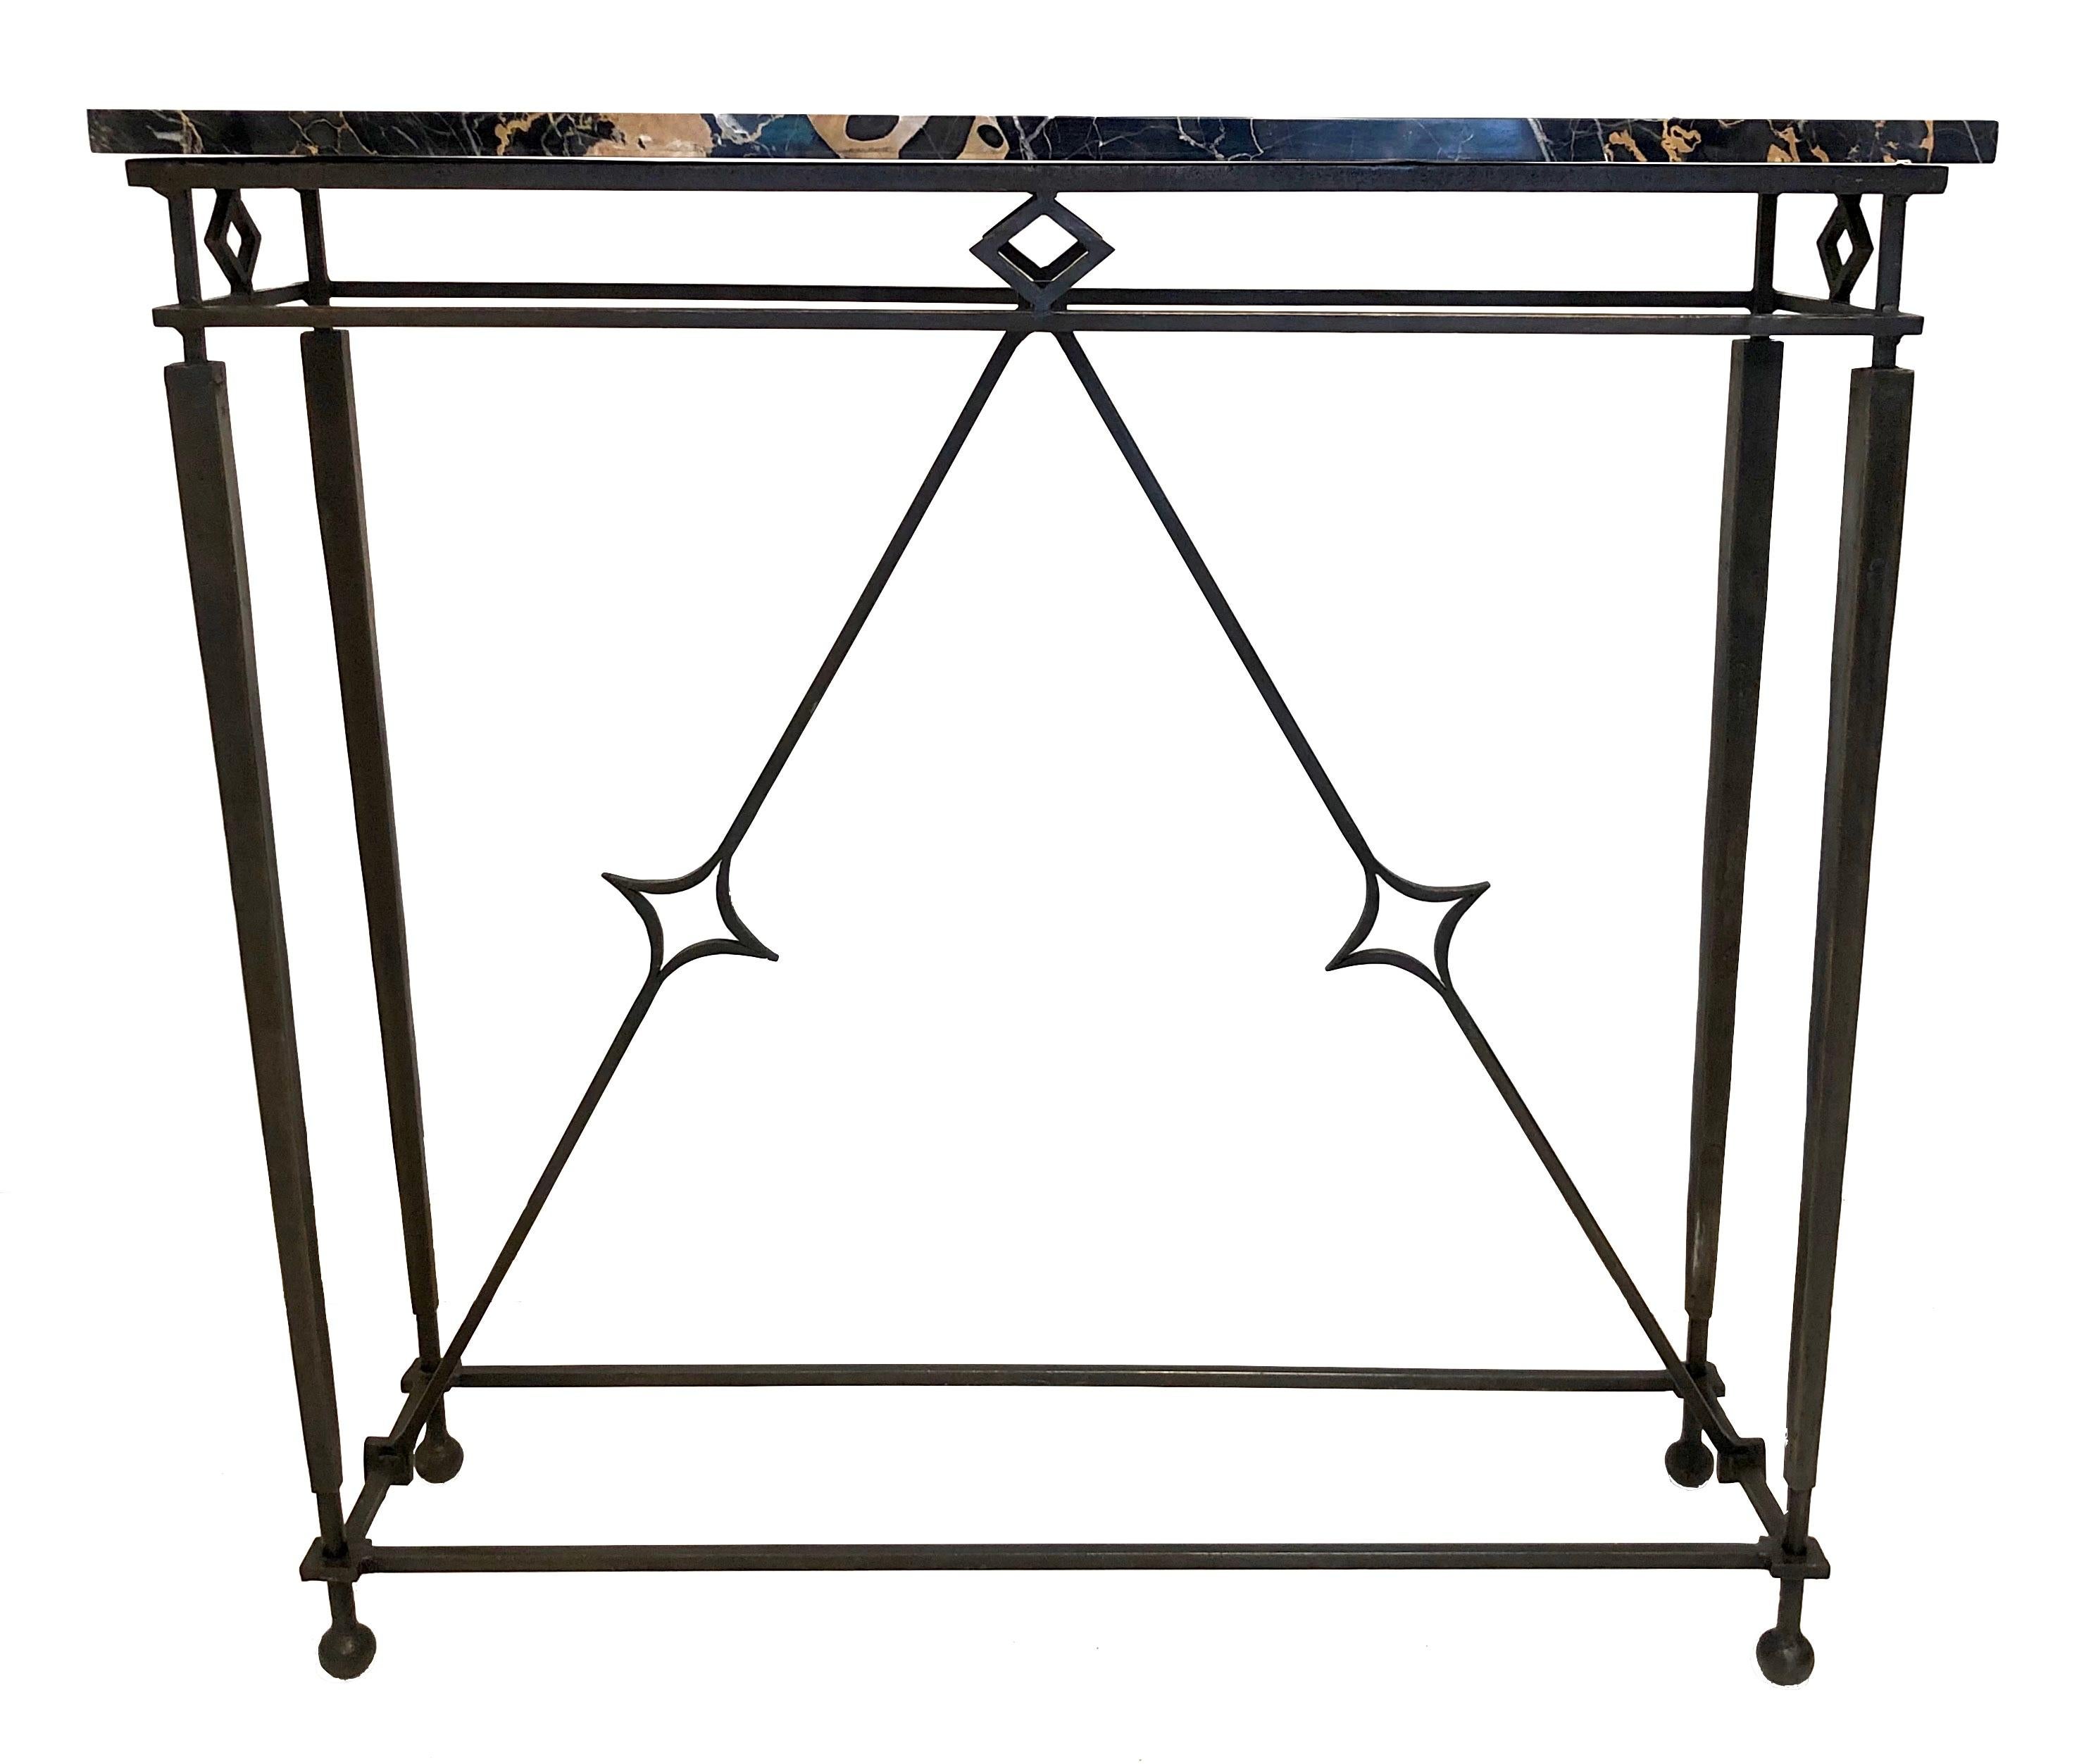 This stylish elegant console-table was made in Paris, circa 1940.
The rectangular marble top, made out of Porto Oro marble, stands on four square tapered legs in patinated iron with ball feet. Under the top are four rhombus-shaped decorations. All